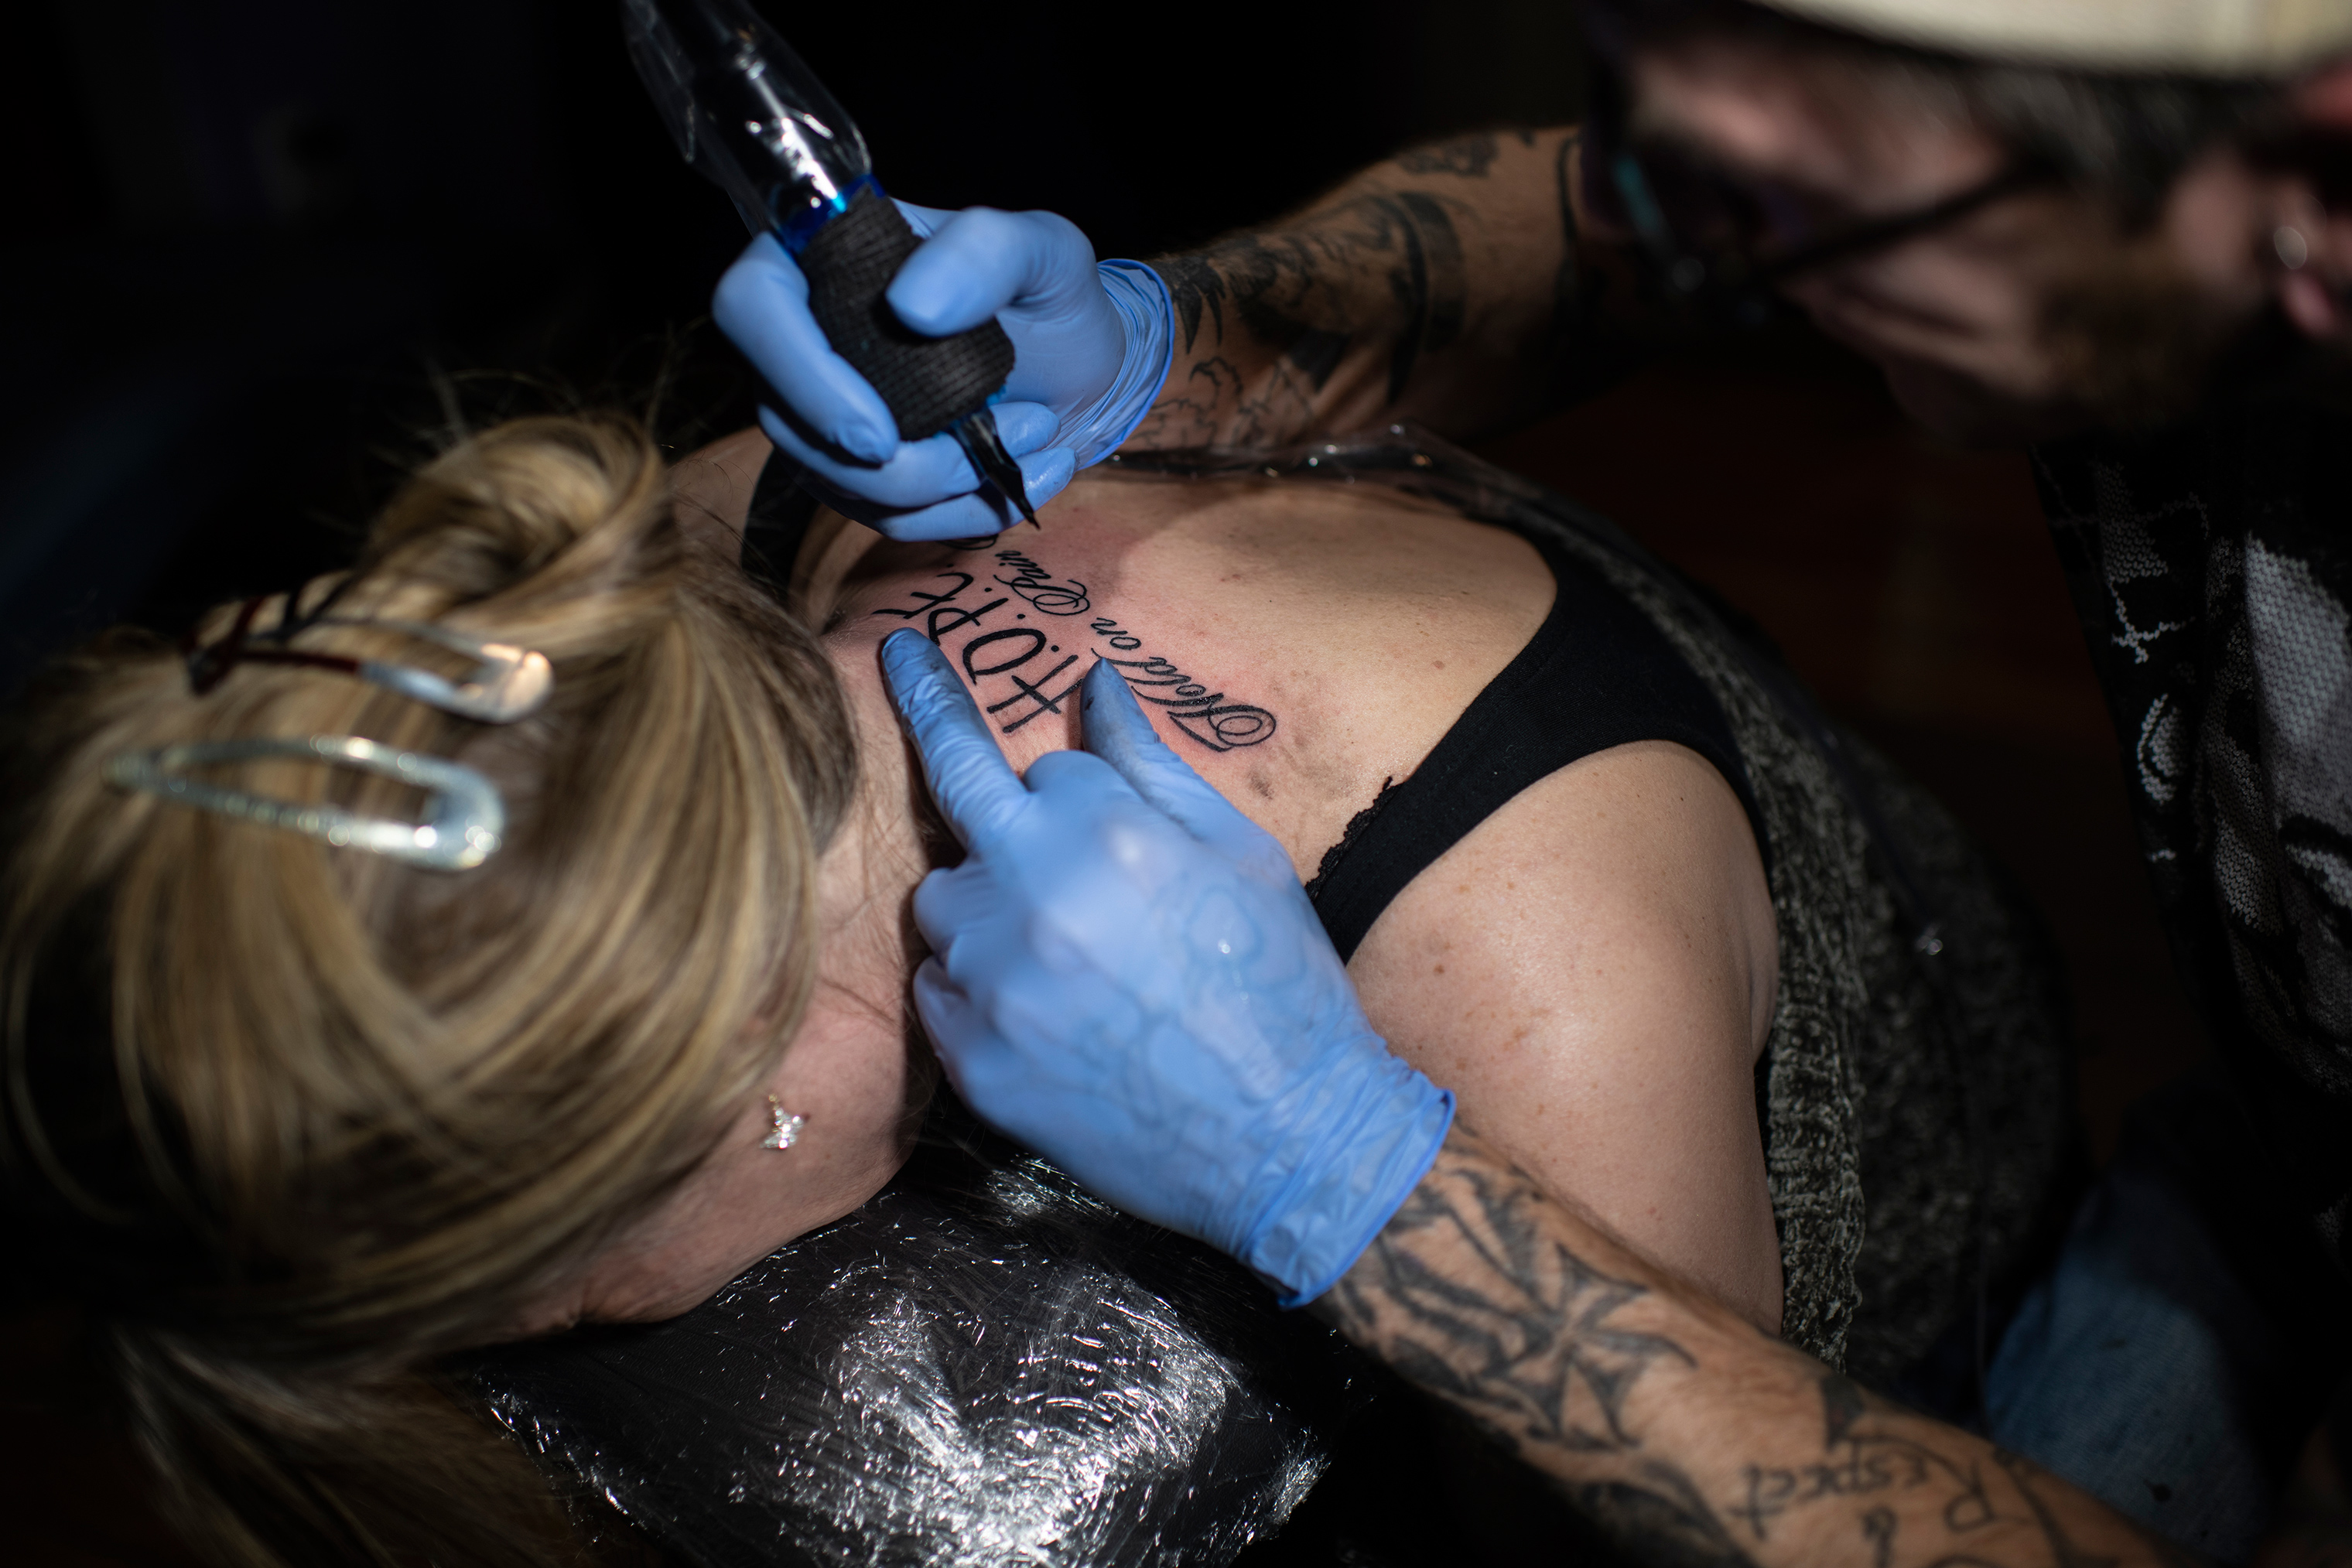 Knoblauch gets a tattoo in April to commemorate her freedom from traffickers (Lynsey Addario for TIME)